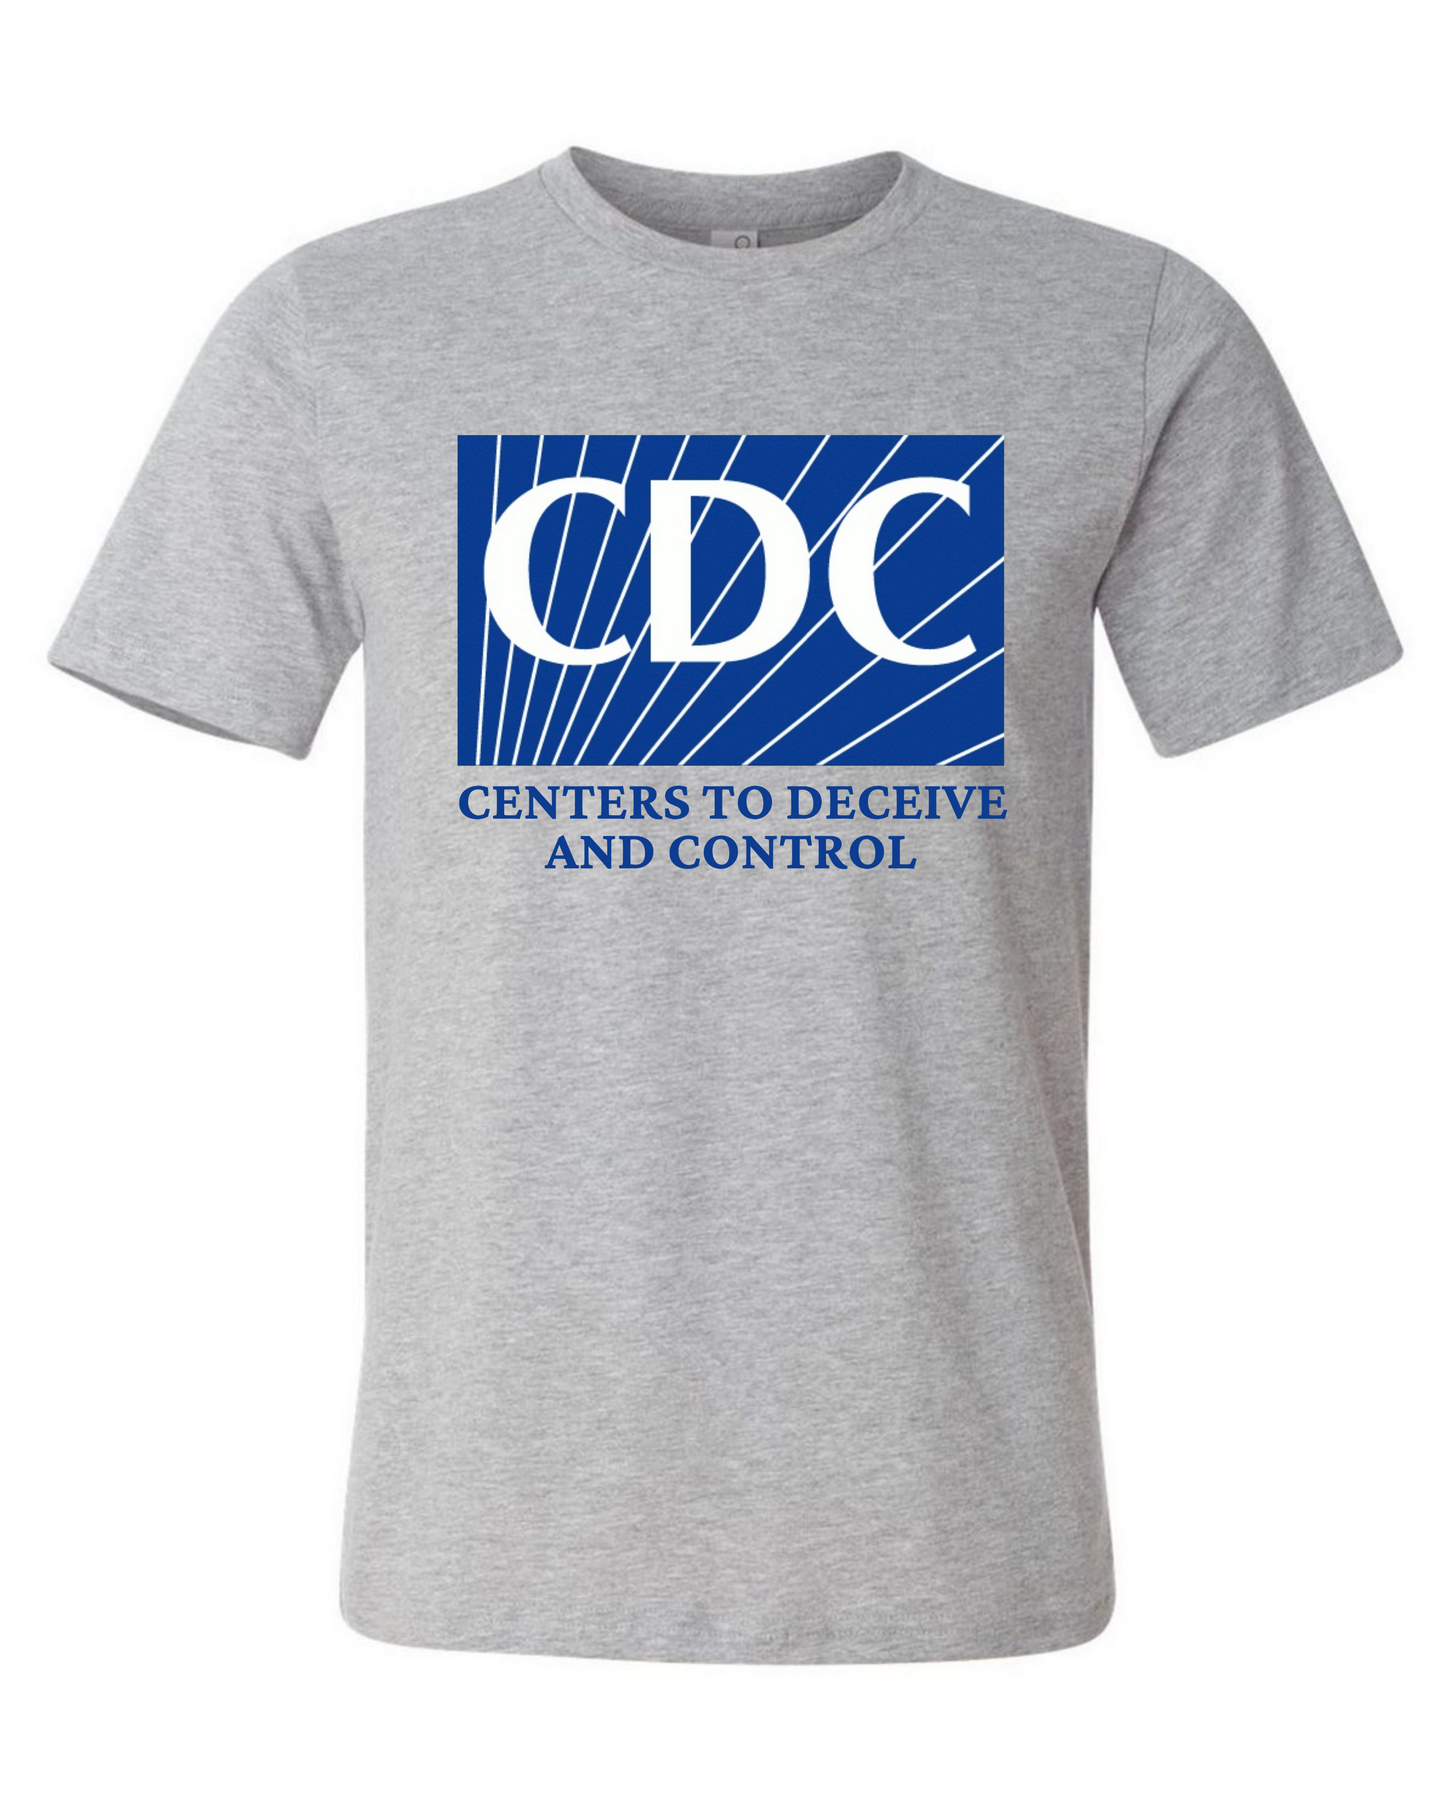 centers to deceive and control shirt